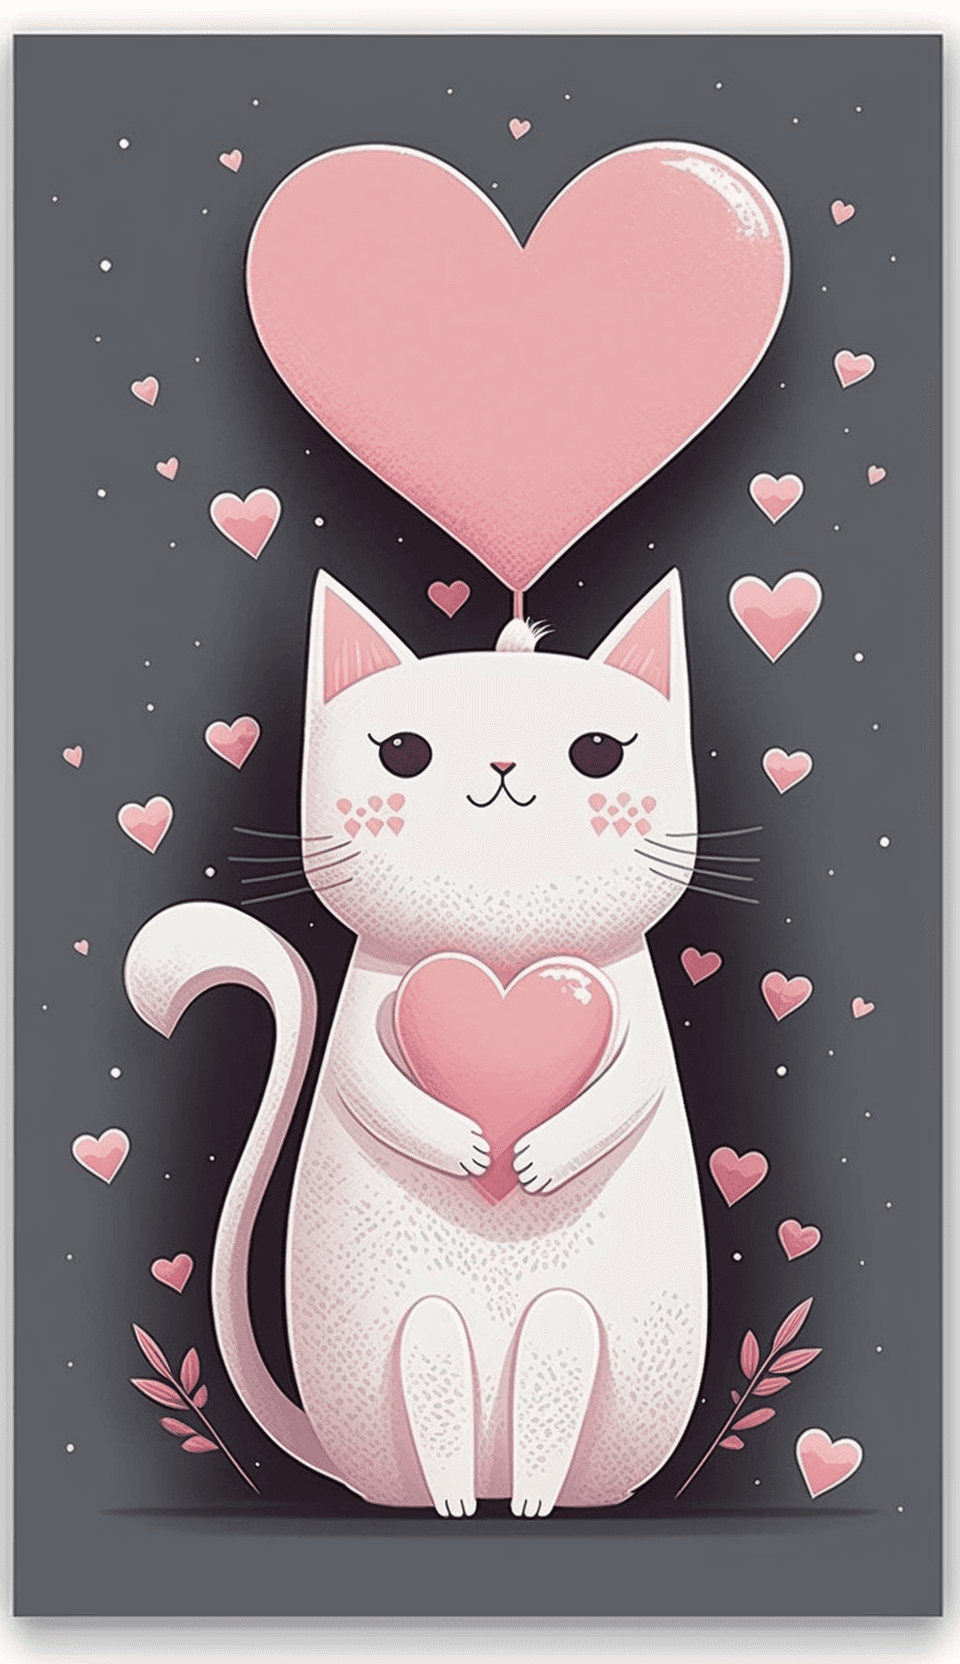 Valecat with pink hearts NFT cruzo